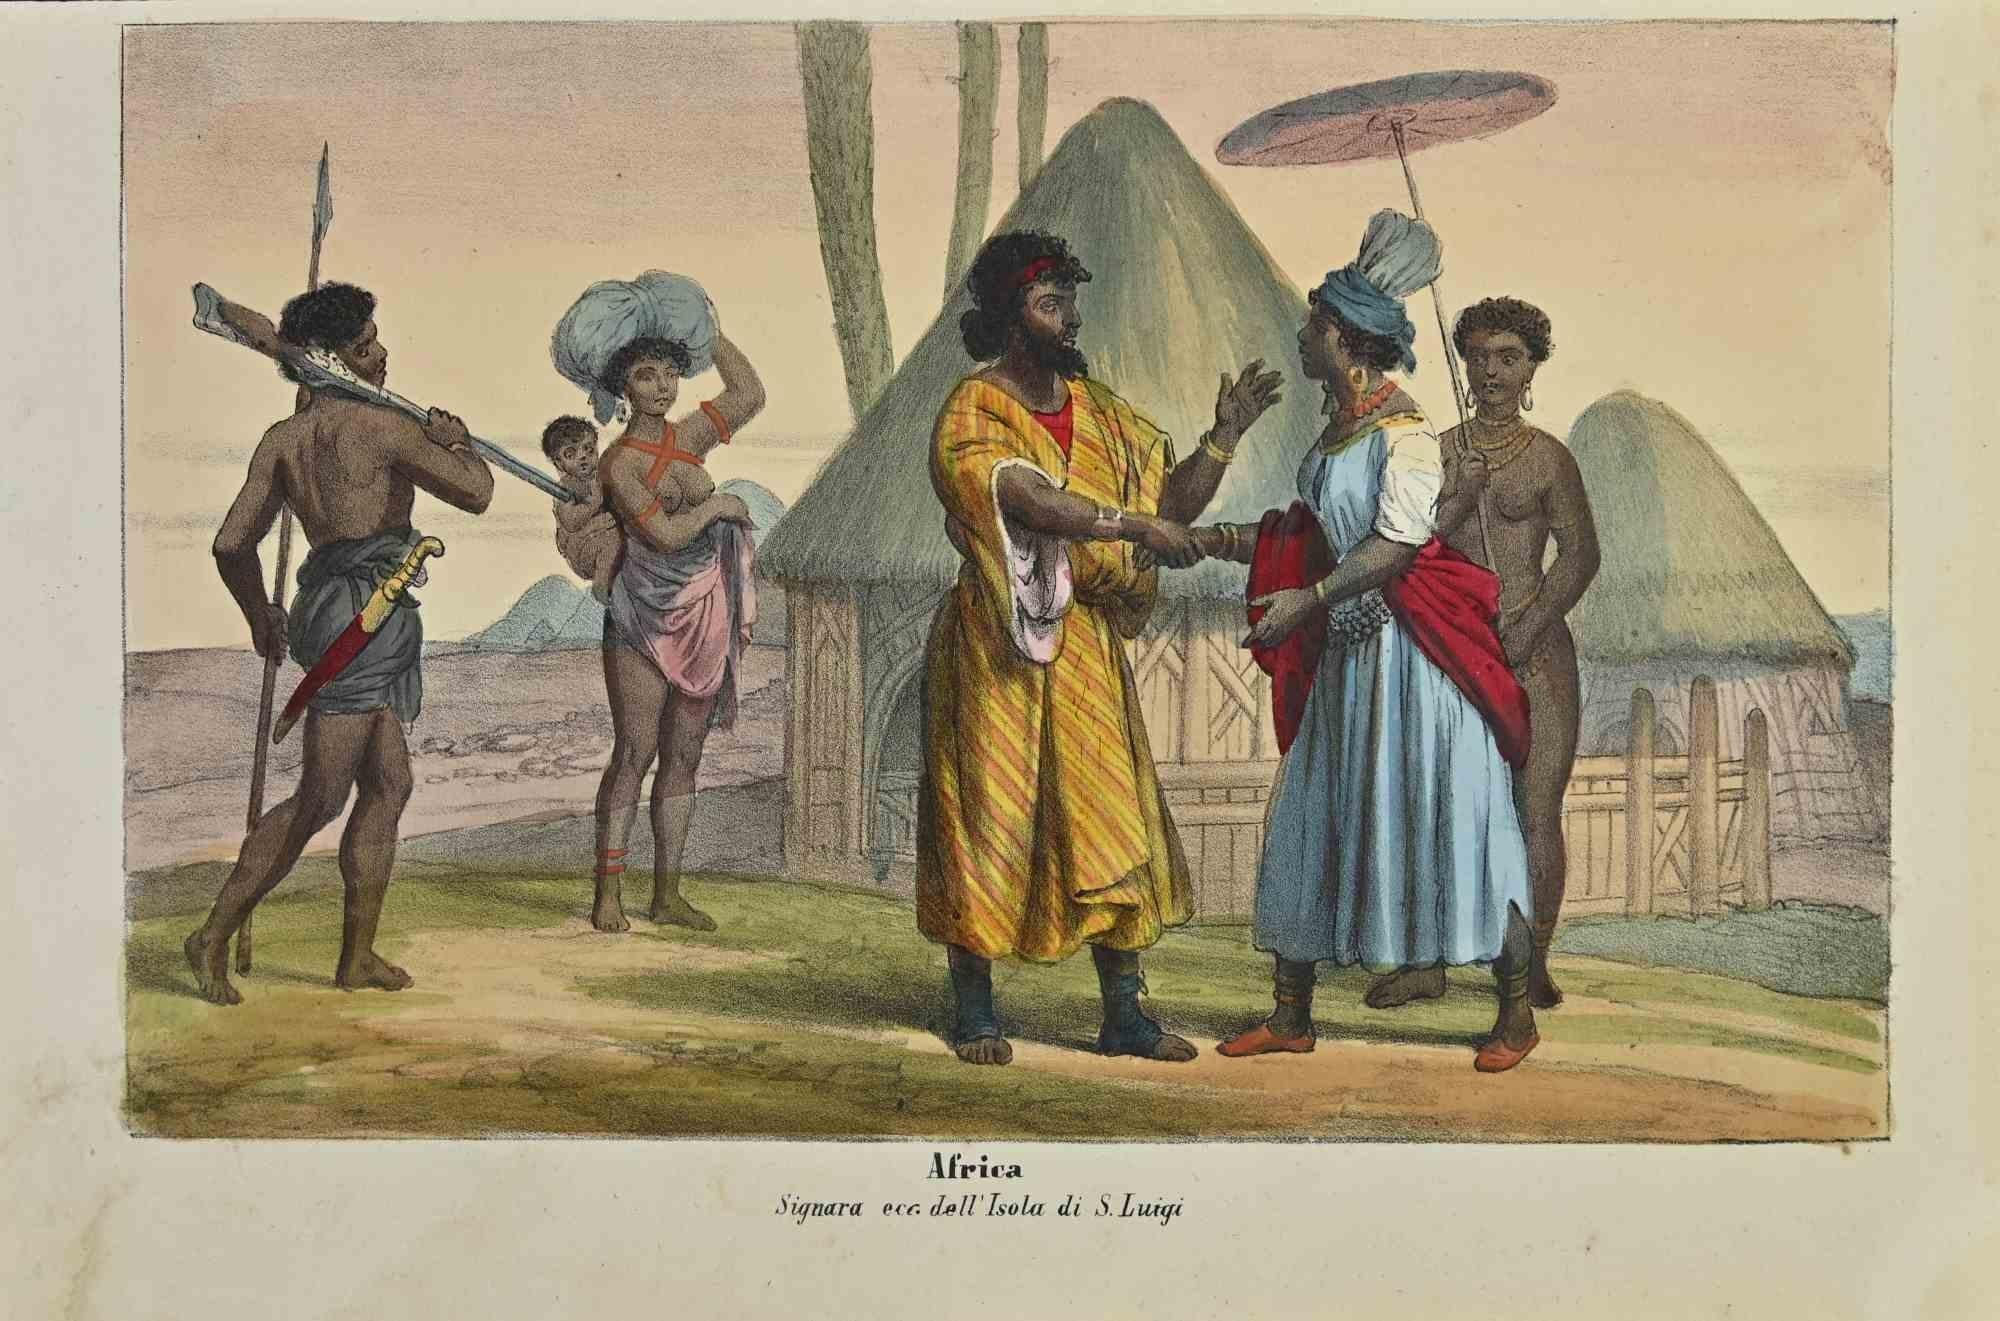 Ancient African Customs is a lithograph made by Auguste Wahlen in 1844.

Hand colored.

Good condition.

At the center of the artwork is the original title "Africa" and subtitle "Signara ecc. dell'Isola di S.Luigi".

The work is part of Suite